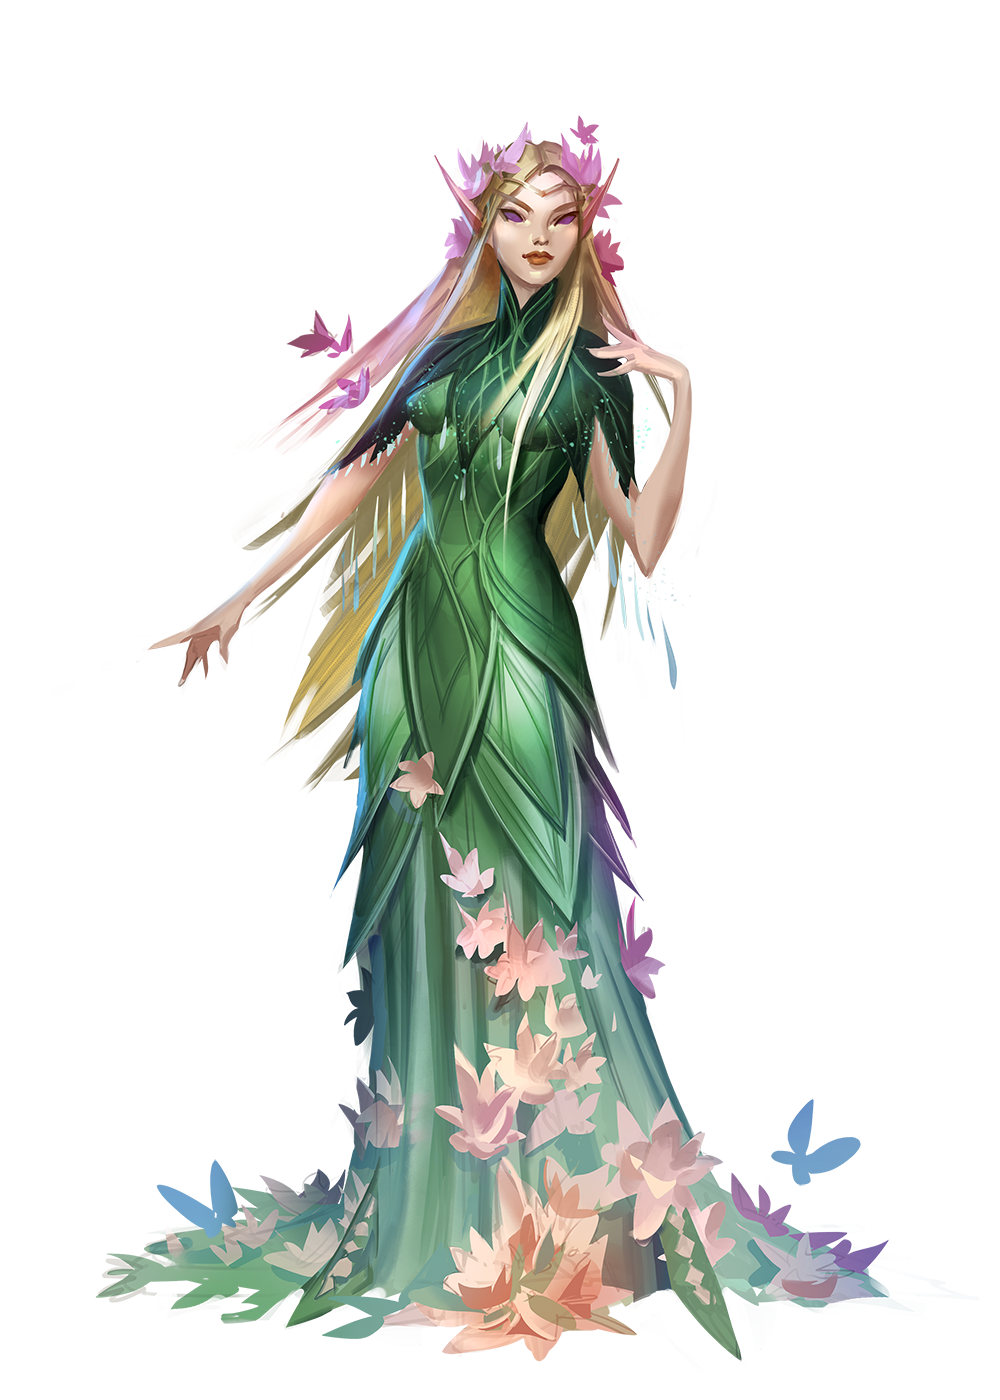 Queen Telandia stands elegantly in a in a leafy green silk dress, wearing a crown of flowering ivy, surrounded by multi-colored butterflies.